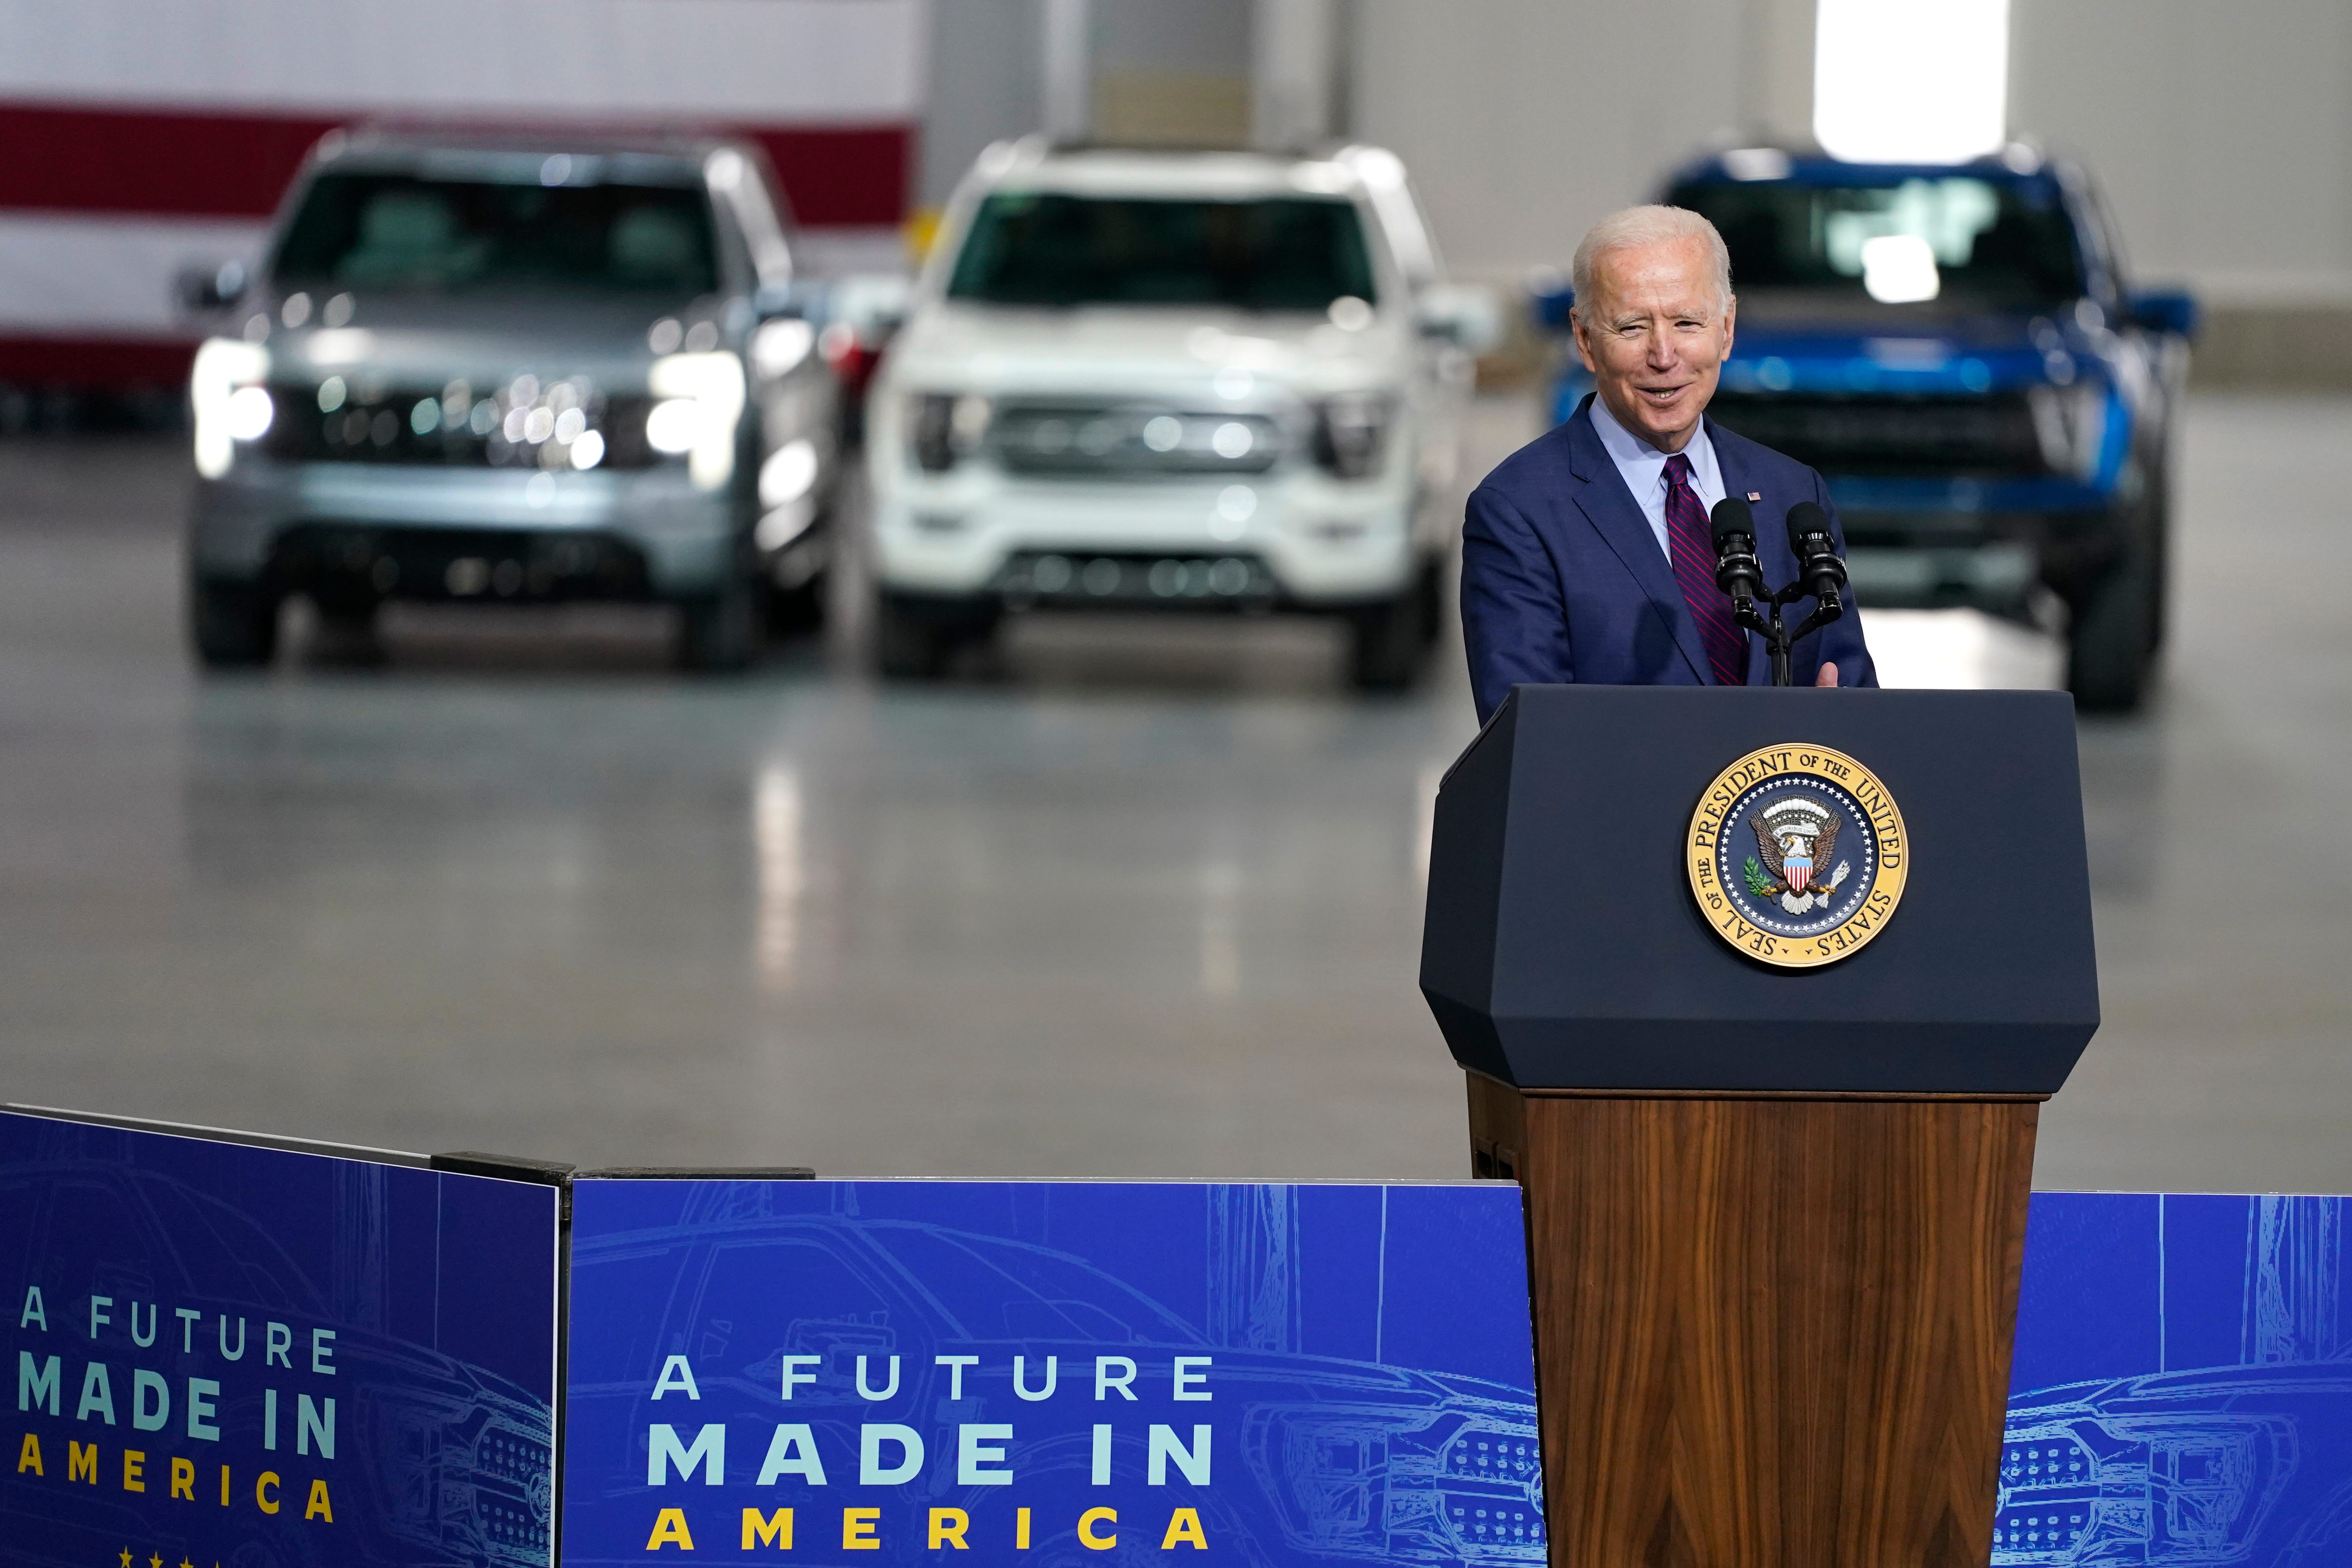 President Joe Biden delivers remarks after a tour of the Ford Rouge EV Center, Tuesday, May 18, 2021, in Dearborn, Mich.